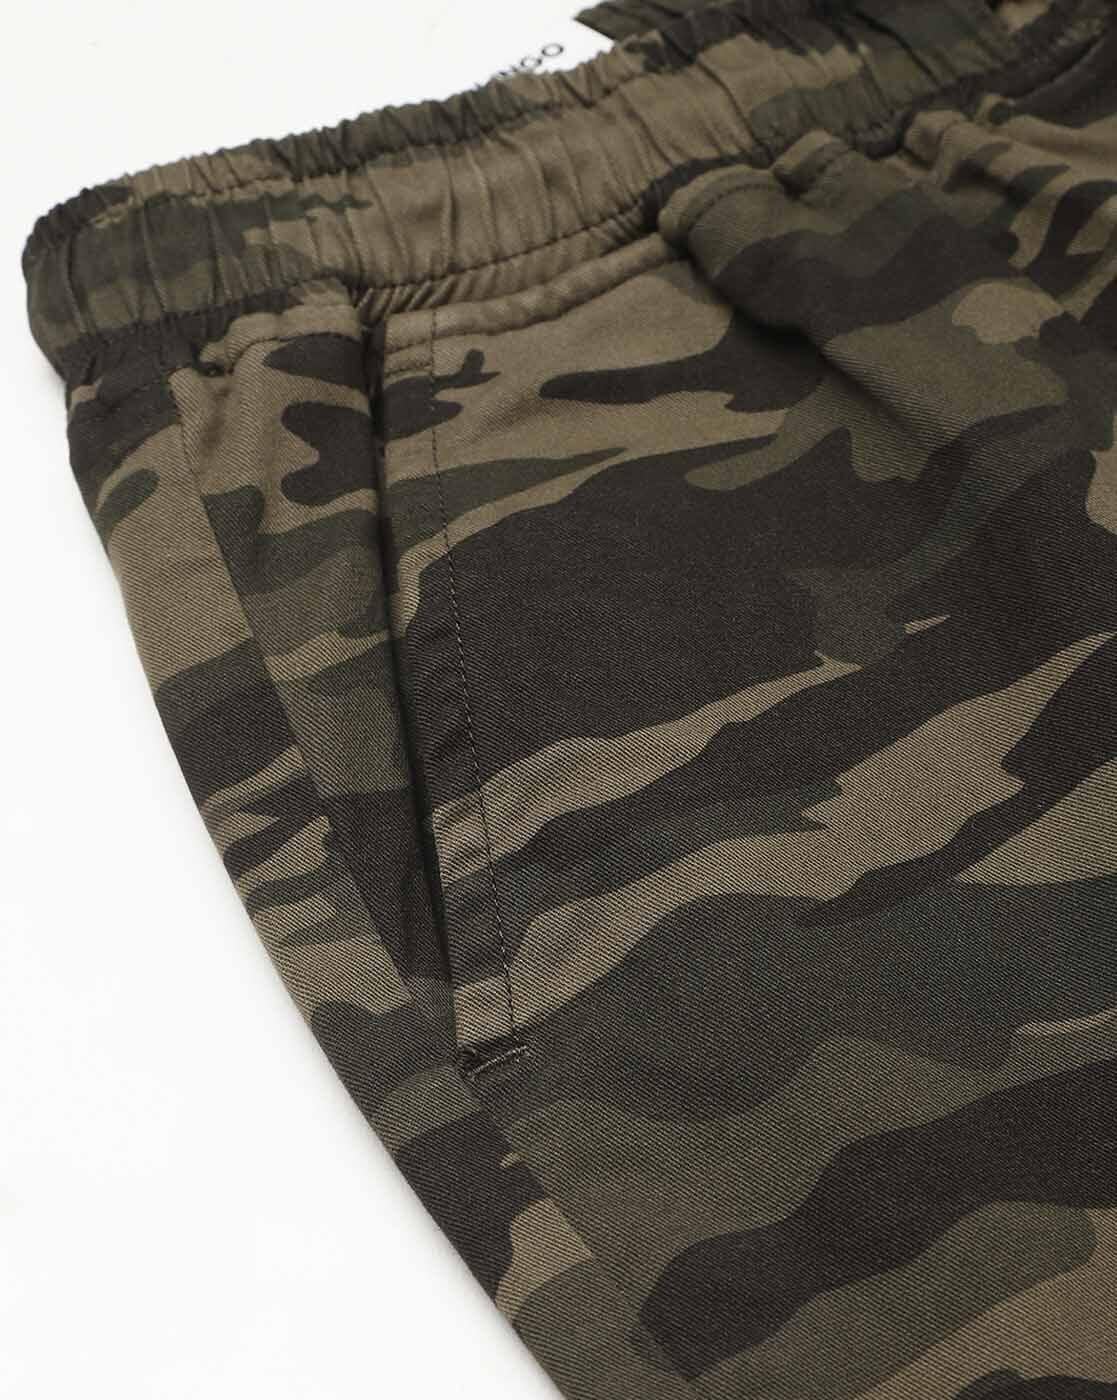 Camo Pants Vintage Chor Clothing Company Camo Cotton Chino Cut Pant 34x30  Slimmer Fit for That Streetwear Look That's a Super Trend. - Etsy